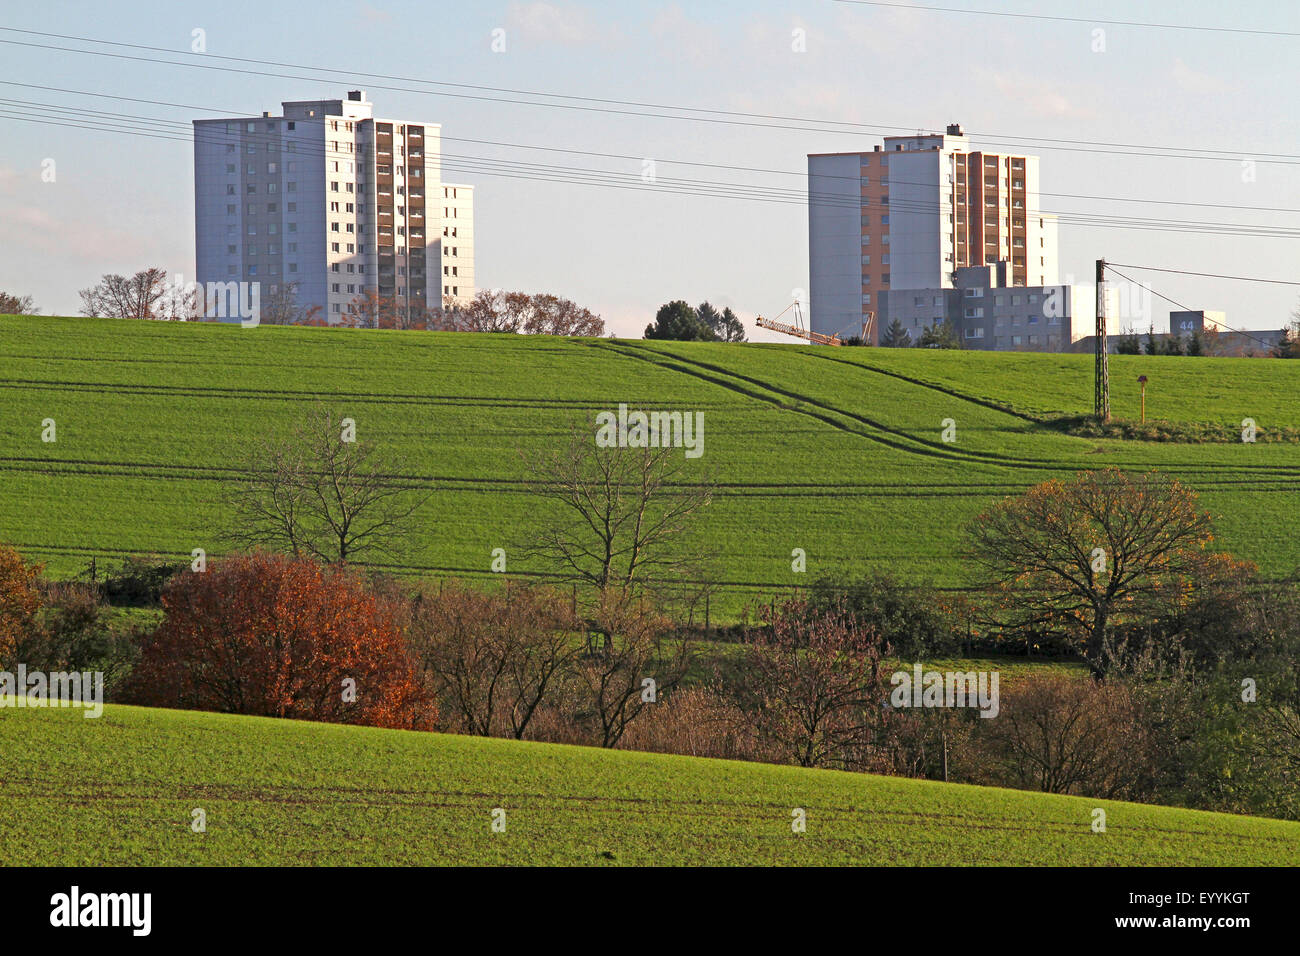 tower blocks and hilly field landscape in autumn, Germany, North Rhine-Westphalia Stock Photo